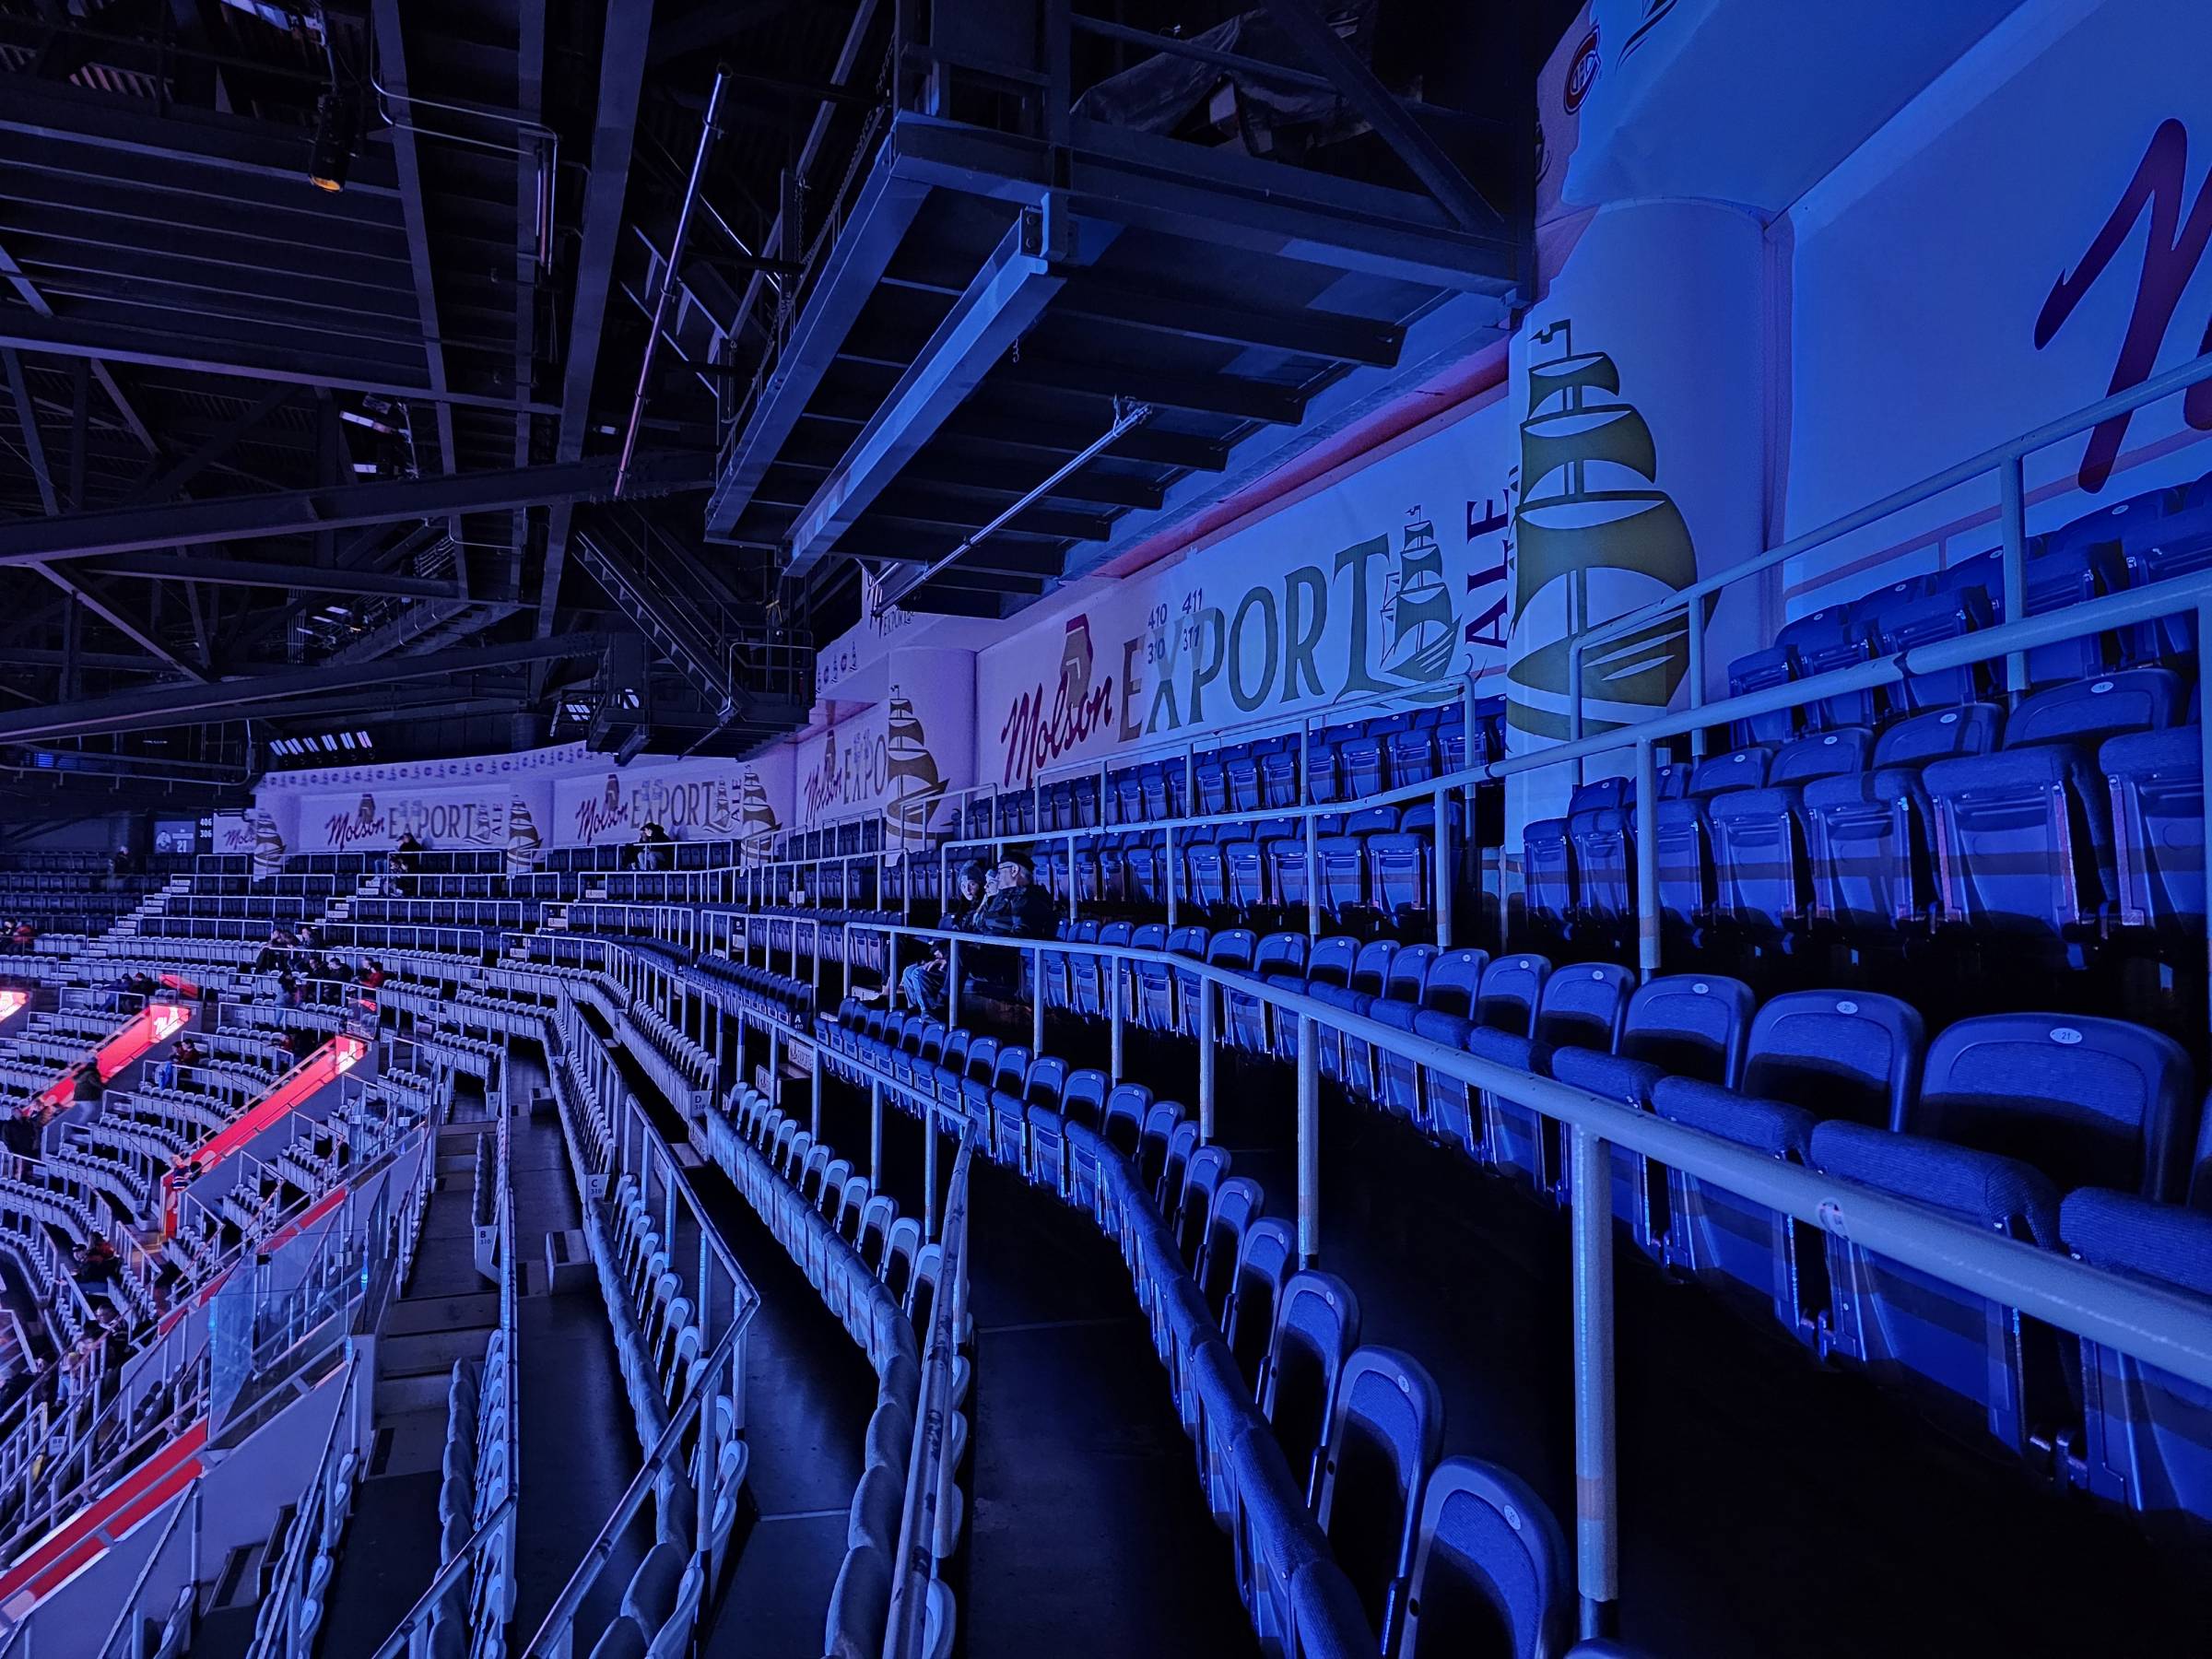 Molson Export Zone at the Bell Centre